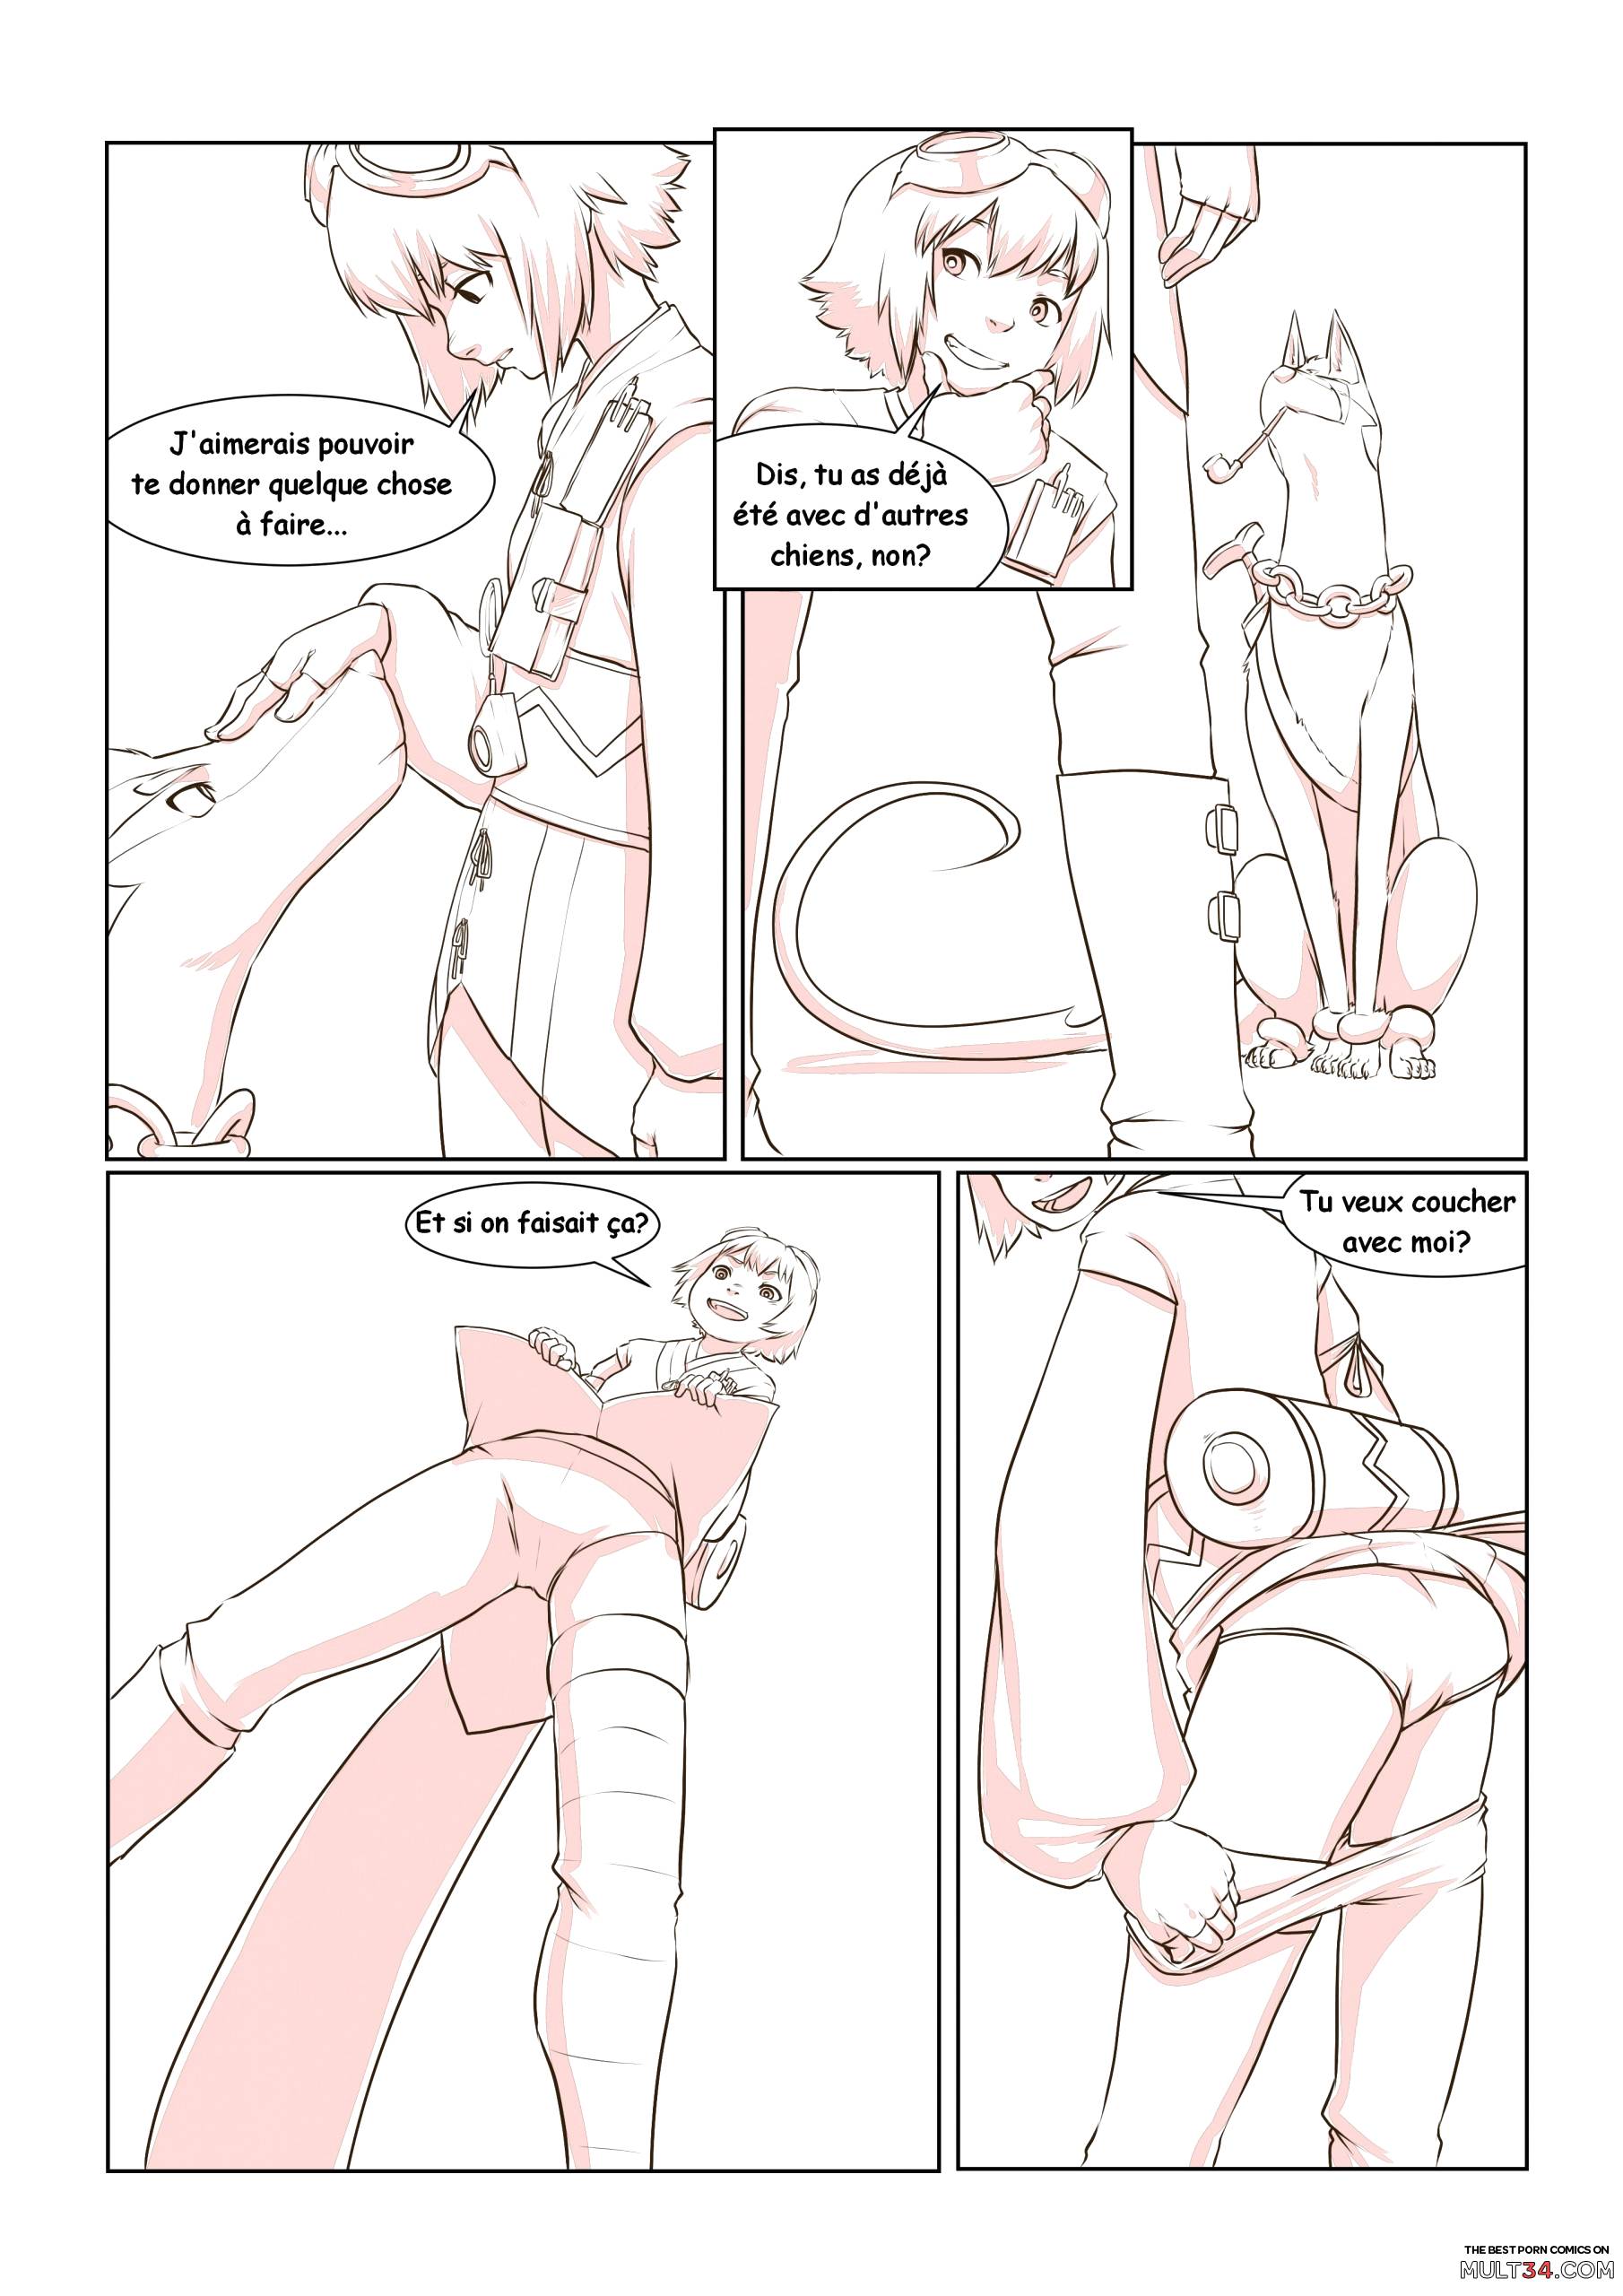 Tales of Rita and Repede - Episode 1 page 8